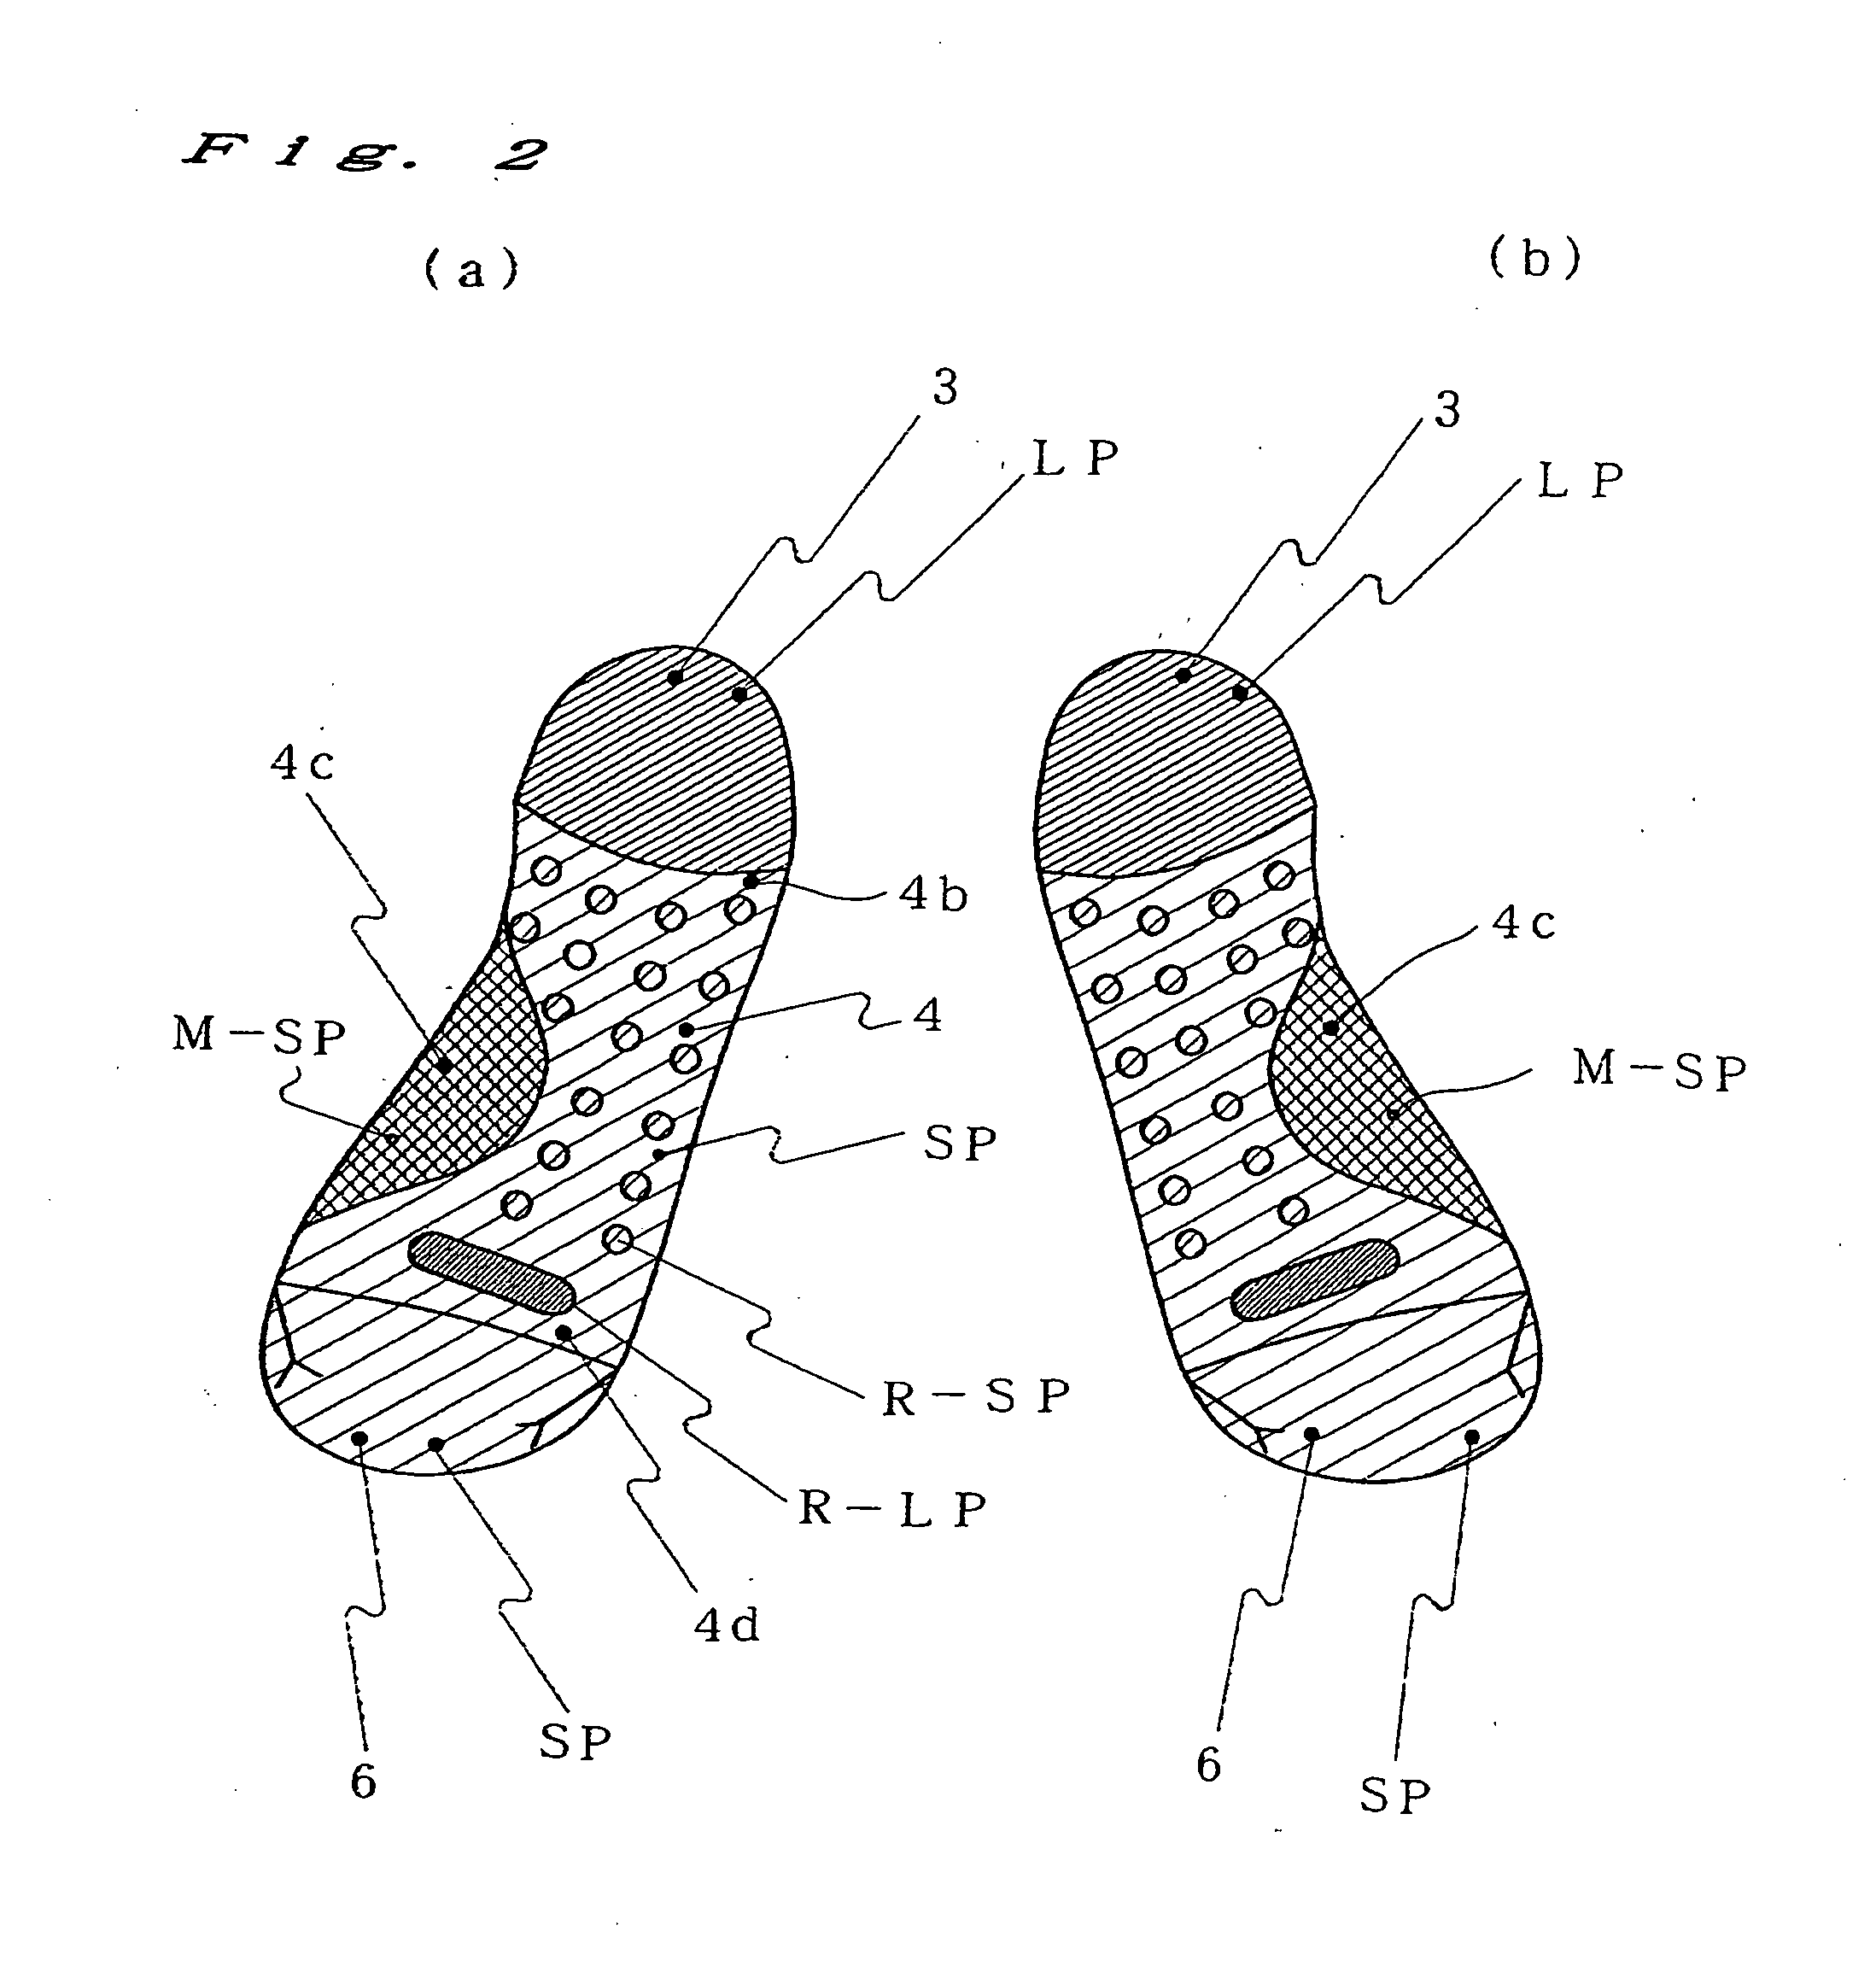 Socks of Multi-Stage Pile Structure